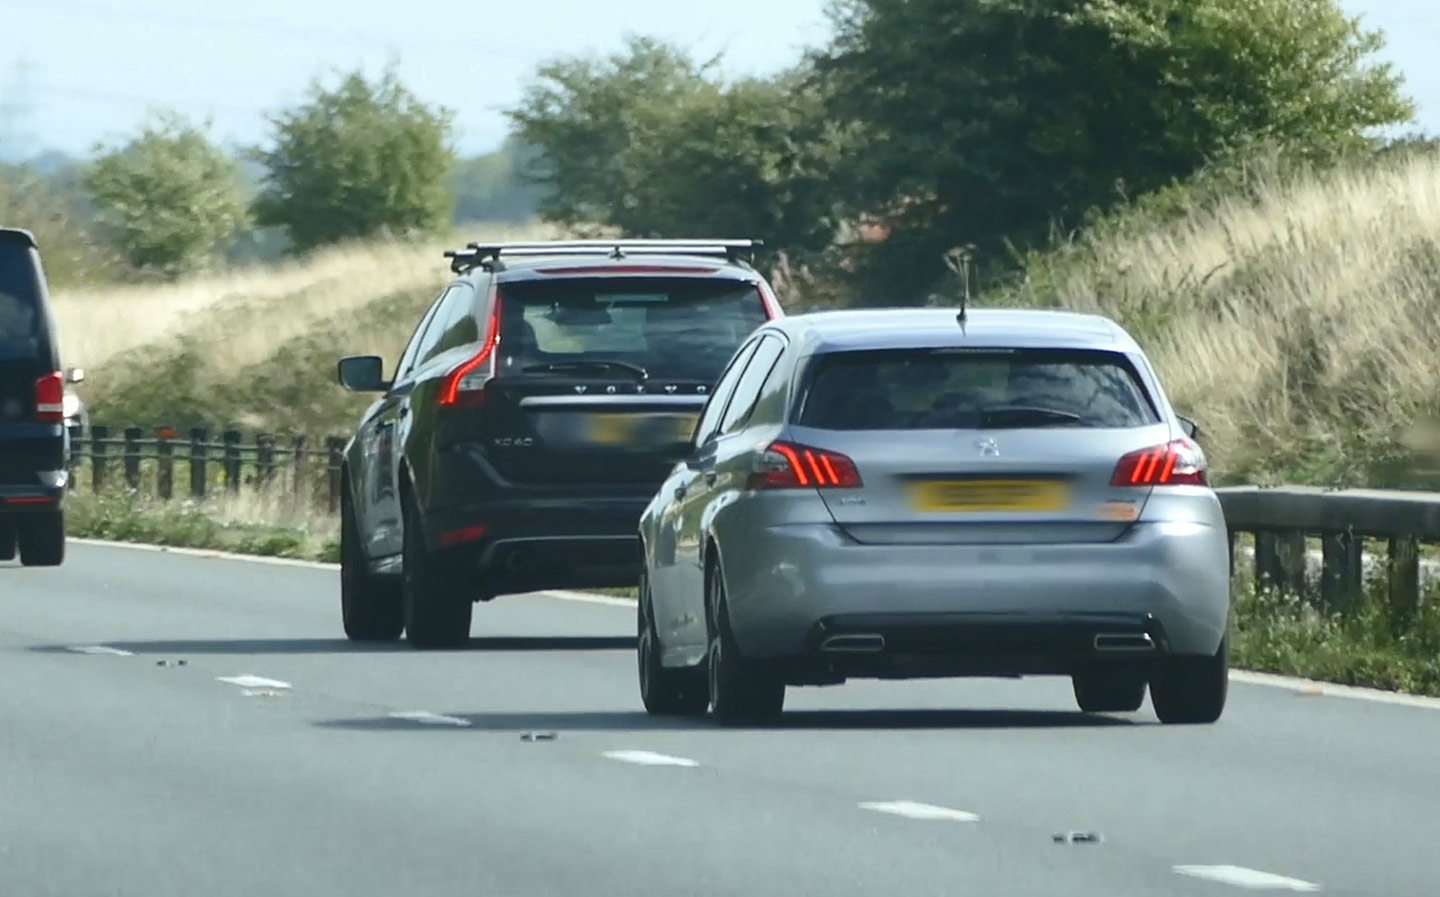 Drive too close to the car in front and risk £100 fine in new clampdown on tailgaters